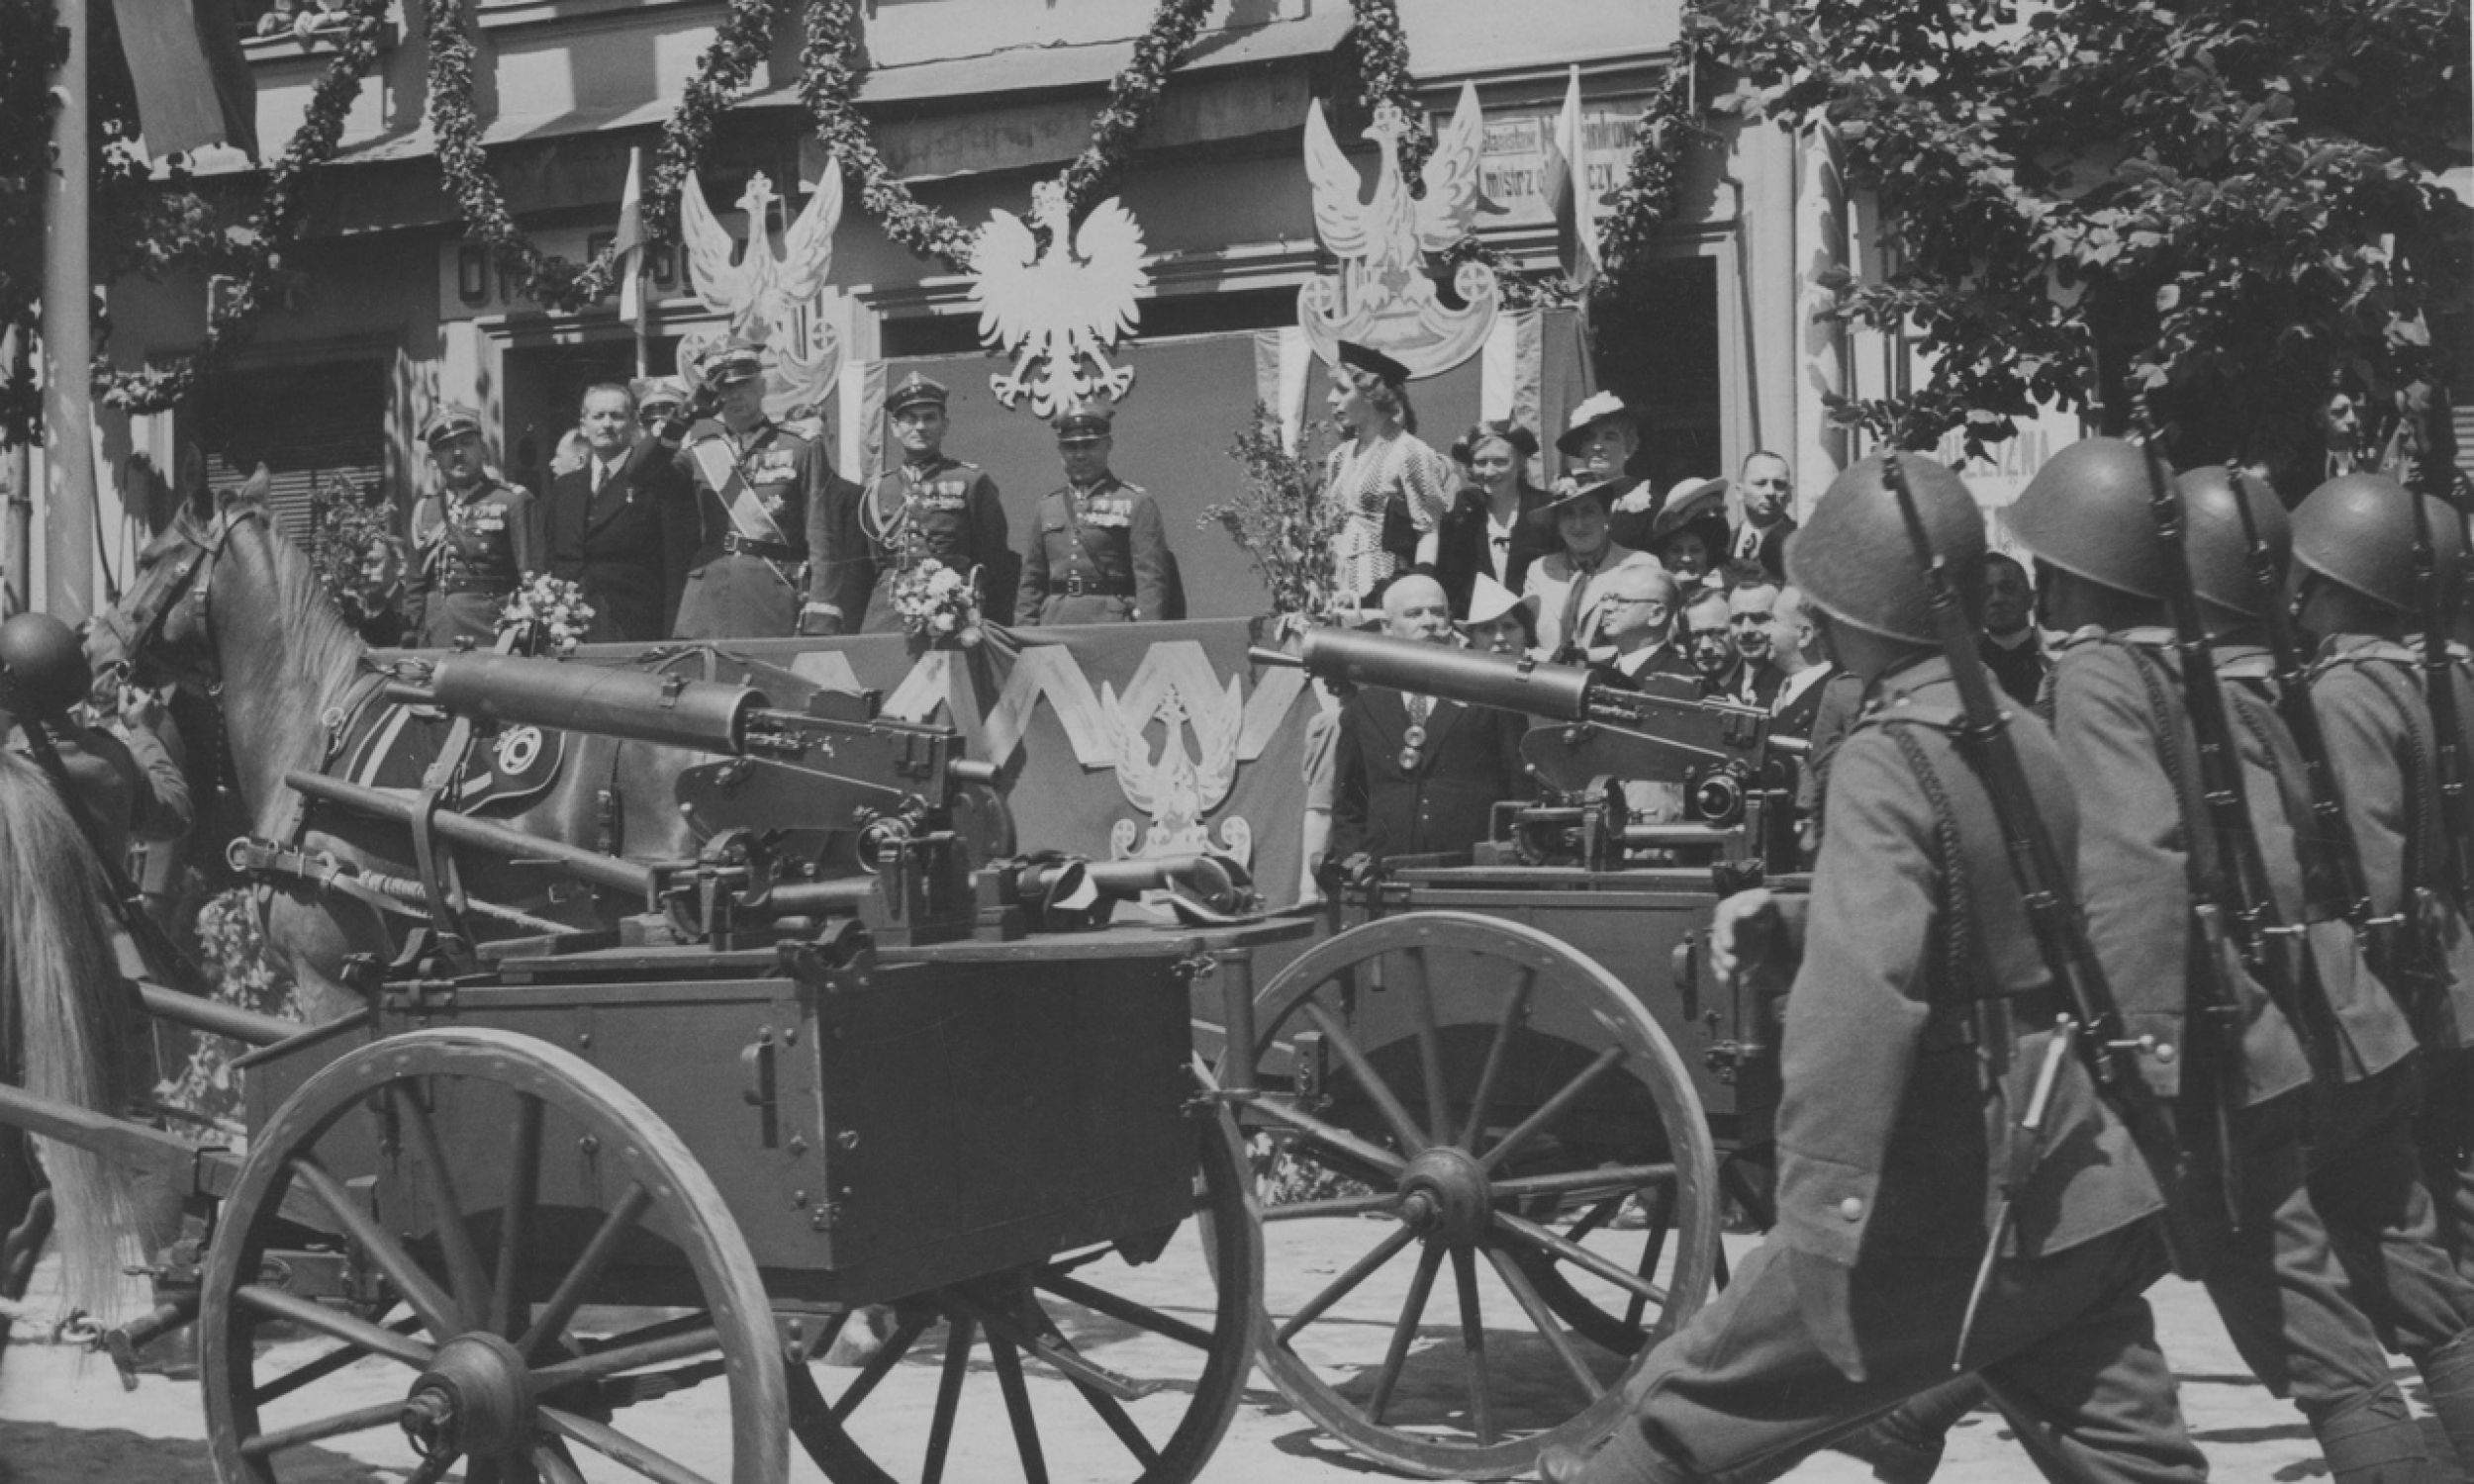 Parade of the 57th Infantry Regiment during the handing over of heavy machine guns financed by the National Defence Fund Committee in Nowy Tomyśl. Gen. Kazimierz Sosnkowski wearing a sash on the tribune. Browning heavy machine guns model 30 on carts. July 1938. Photo: NAC/IKC, Witold Pikiel. Catalogue number: 1-W-3015-6 